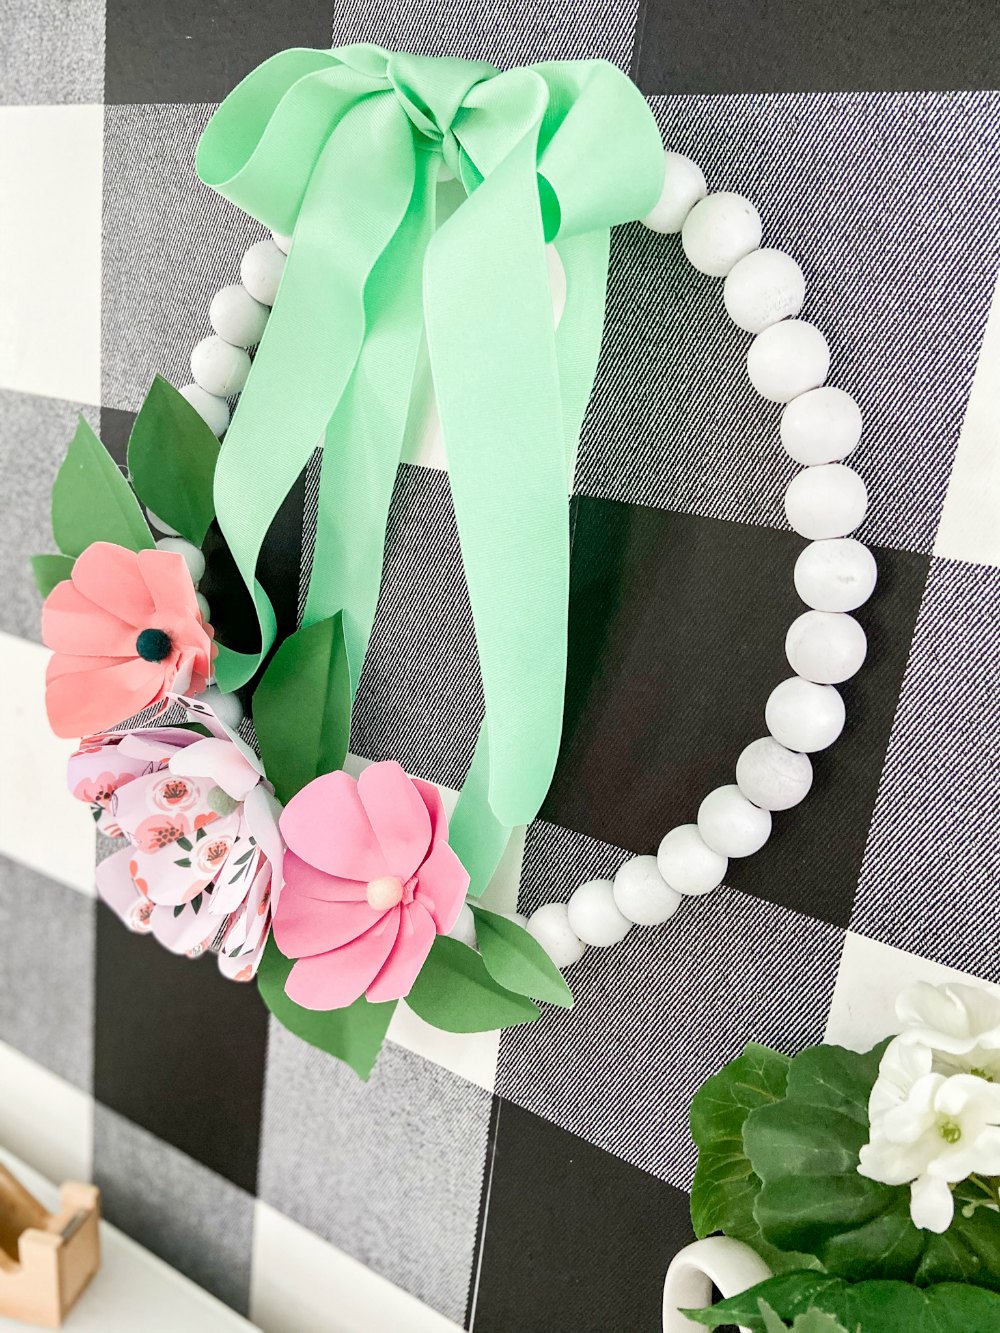 Wood Bead Wreath with Paper Flowers. Make this trendy wood bead wreath and create easy paper flowers with free petal and leaves template!